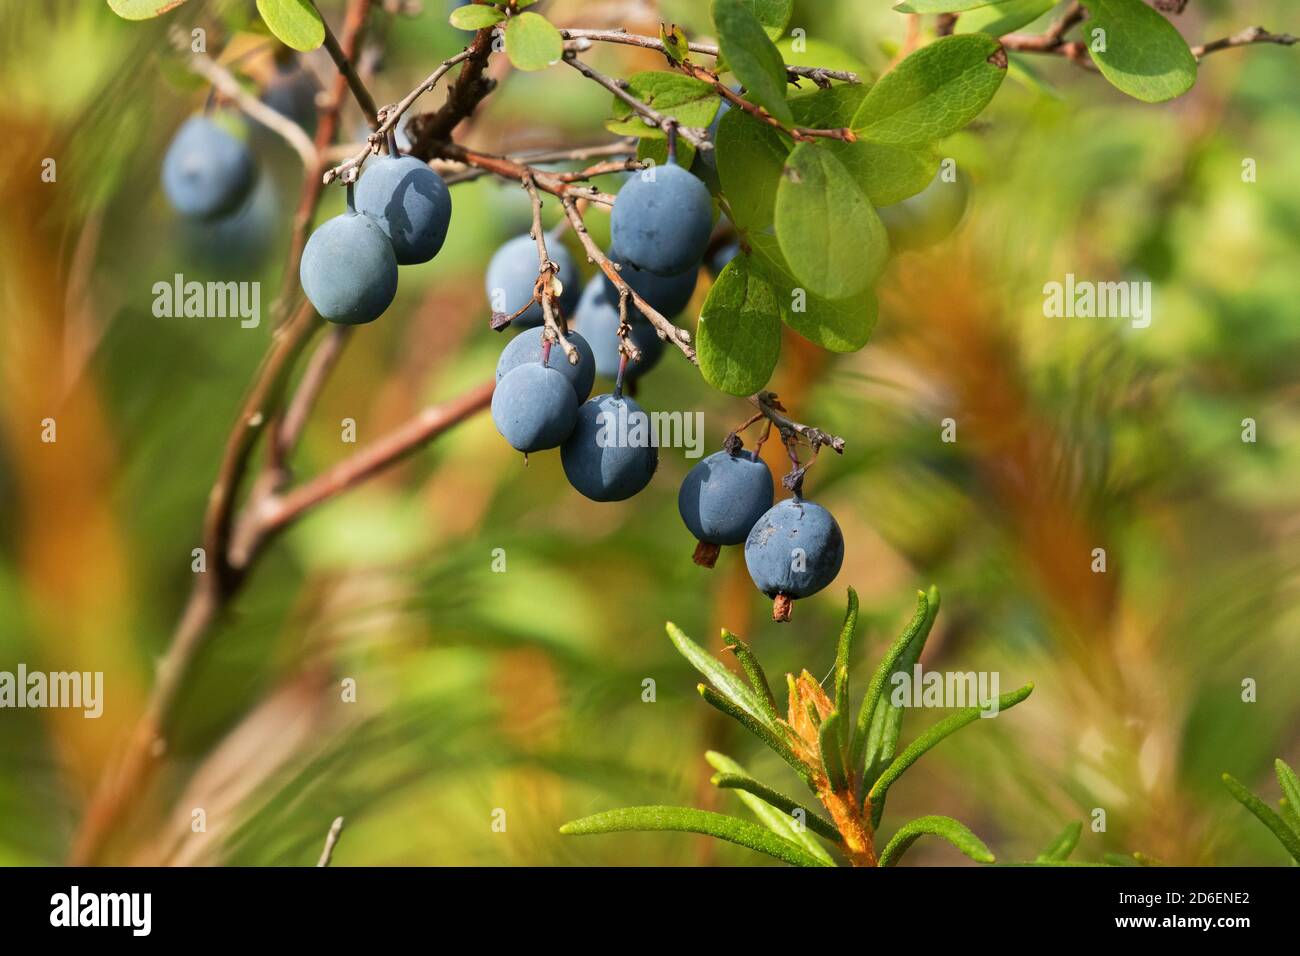 Ripe blue Bog bilberry, Vaccinium uliginosum, as a northern delicacy in a boreal forest in Estonian nature, Northern Europe Stock Photo